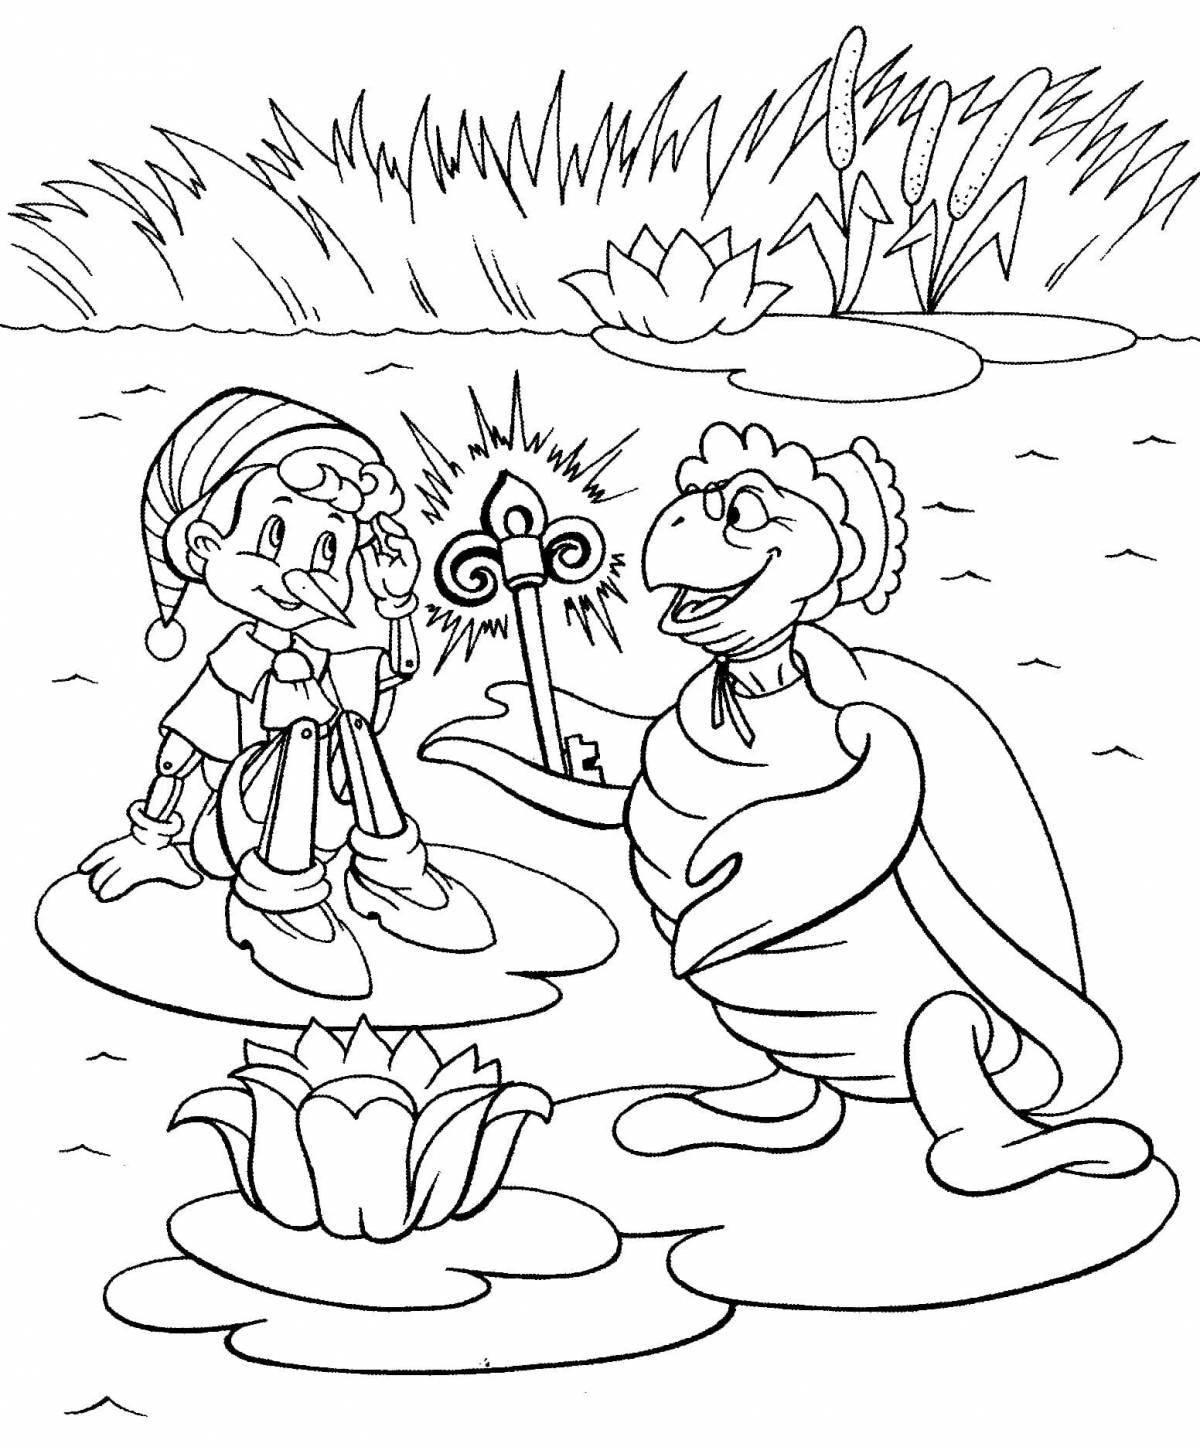 Pinocchio shining coloring page